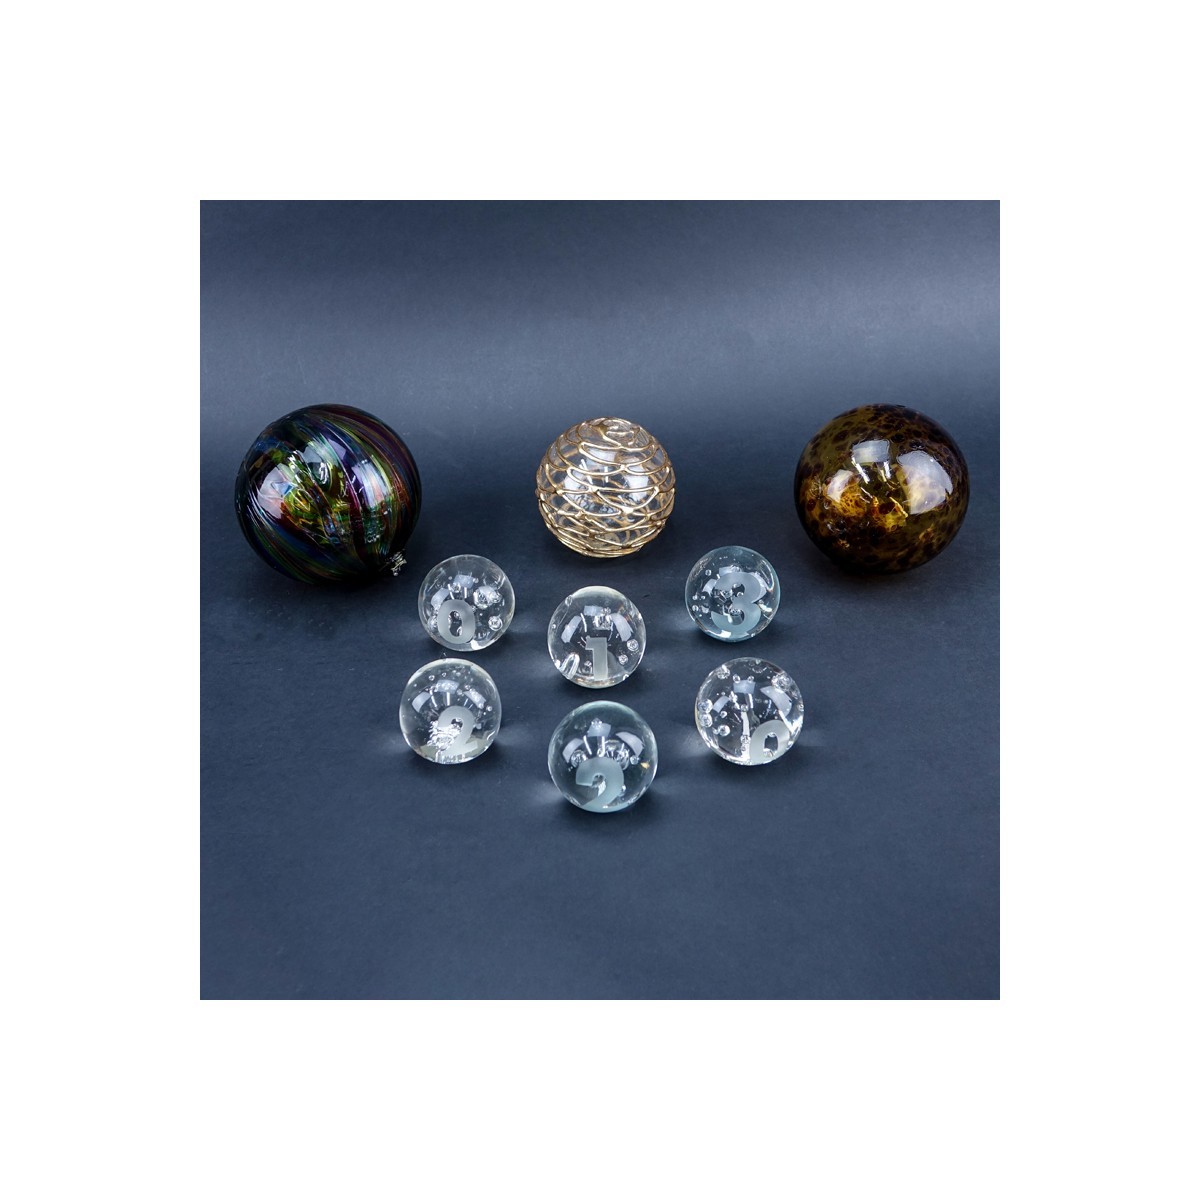 Group of Nine (9): Six Vintage Glass Paperweights along with Three Art Glass Spheres. Label attached to a few paperweights, spheres are unsigned.